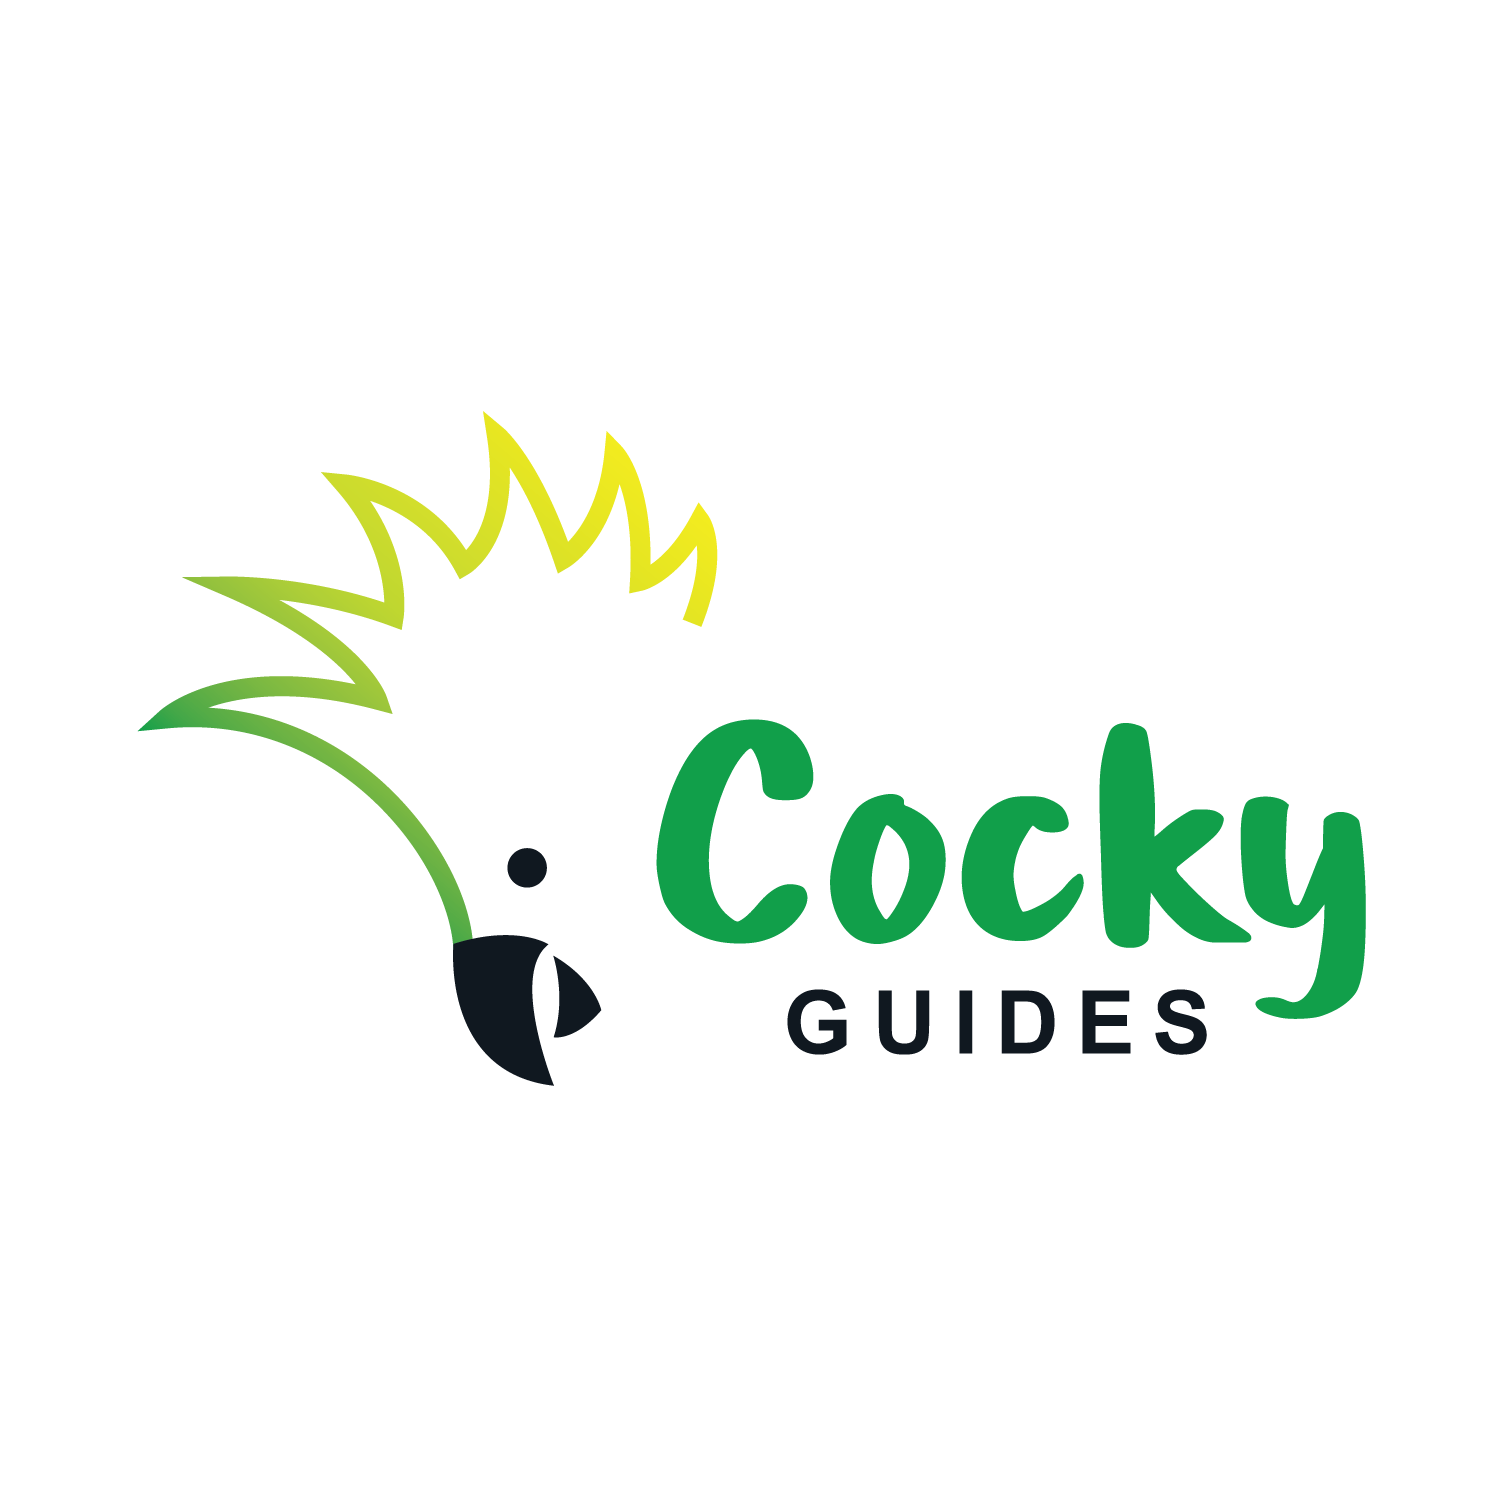 Cocky Guides